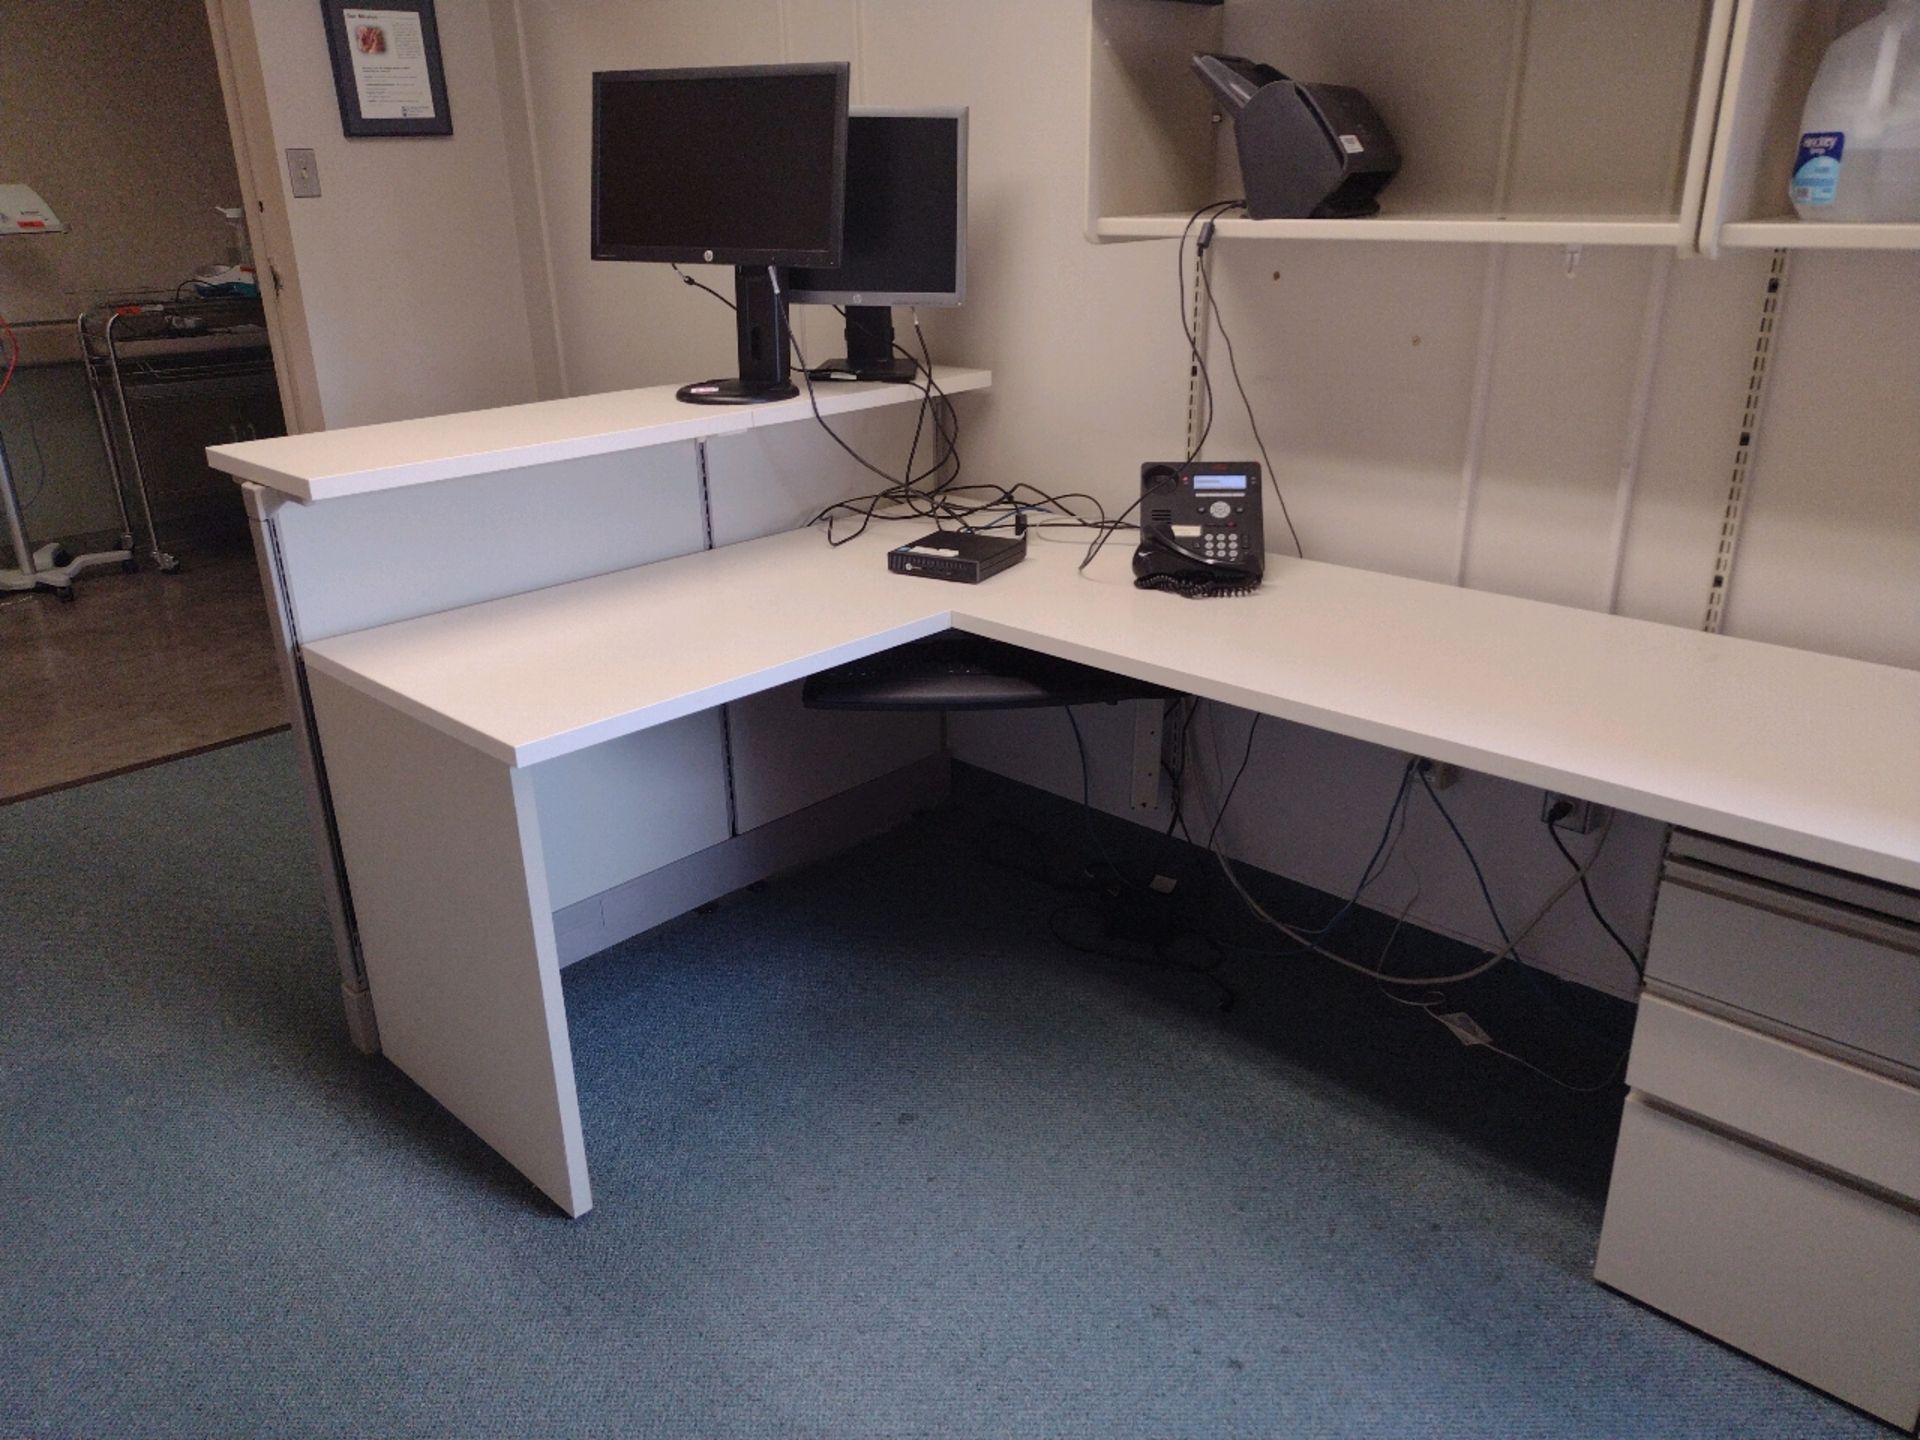 OFFICE TO INCLUDE: MODULAR WORK SPACE WITH OVERHEAD STORAGE, DESK, CHAIR, BOOKCASE AND 2 MONITORS (